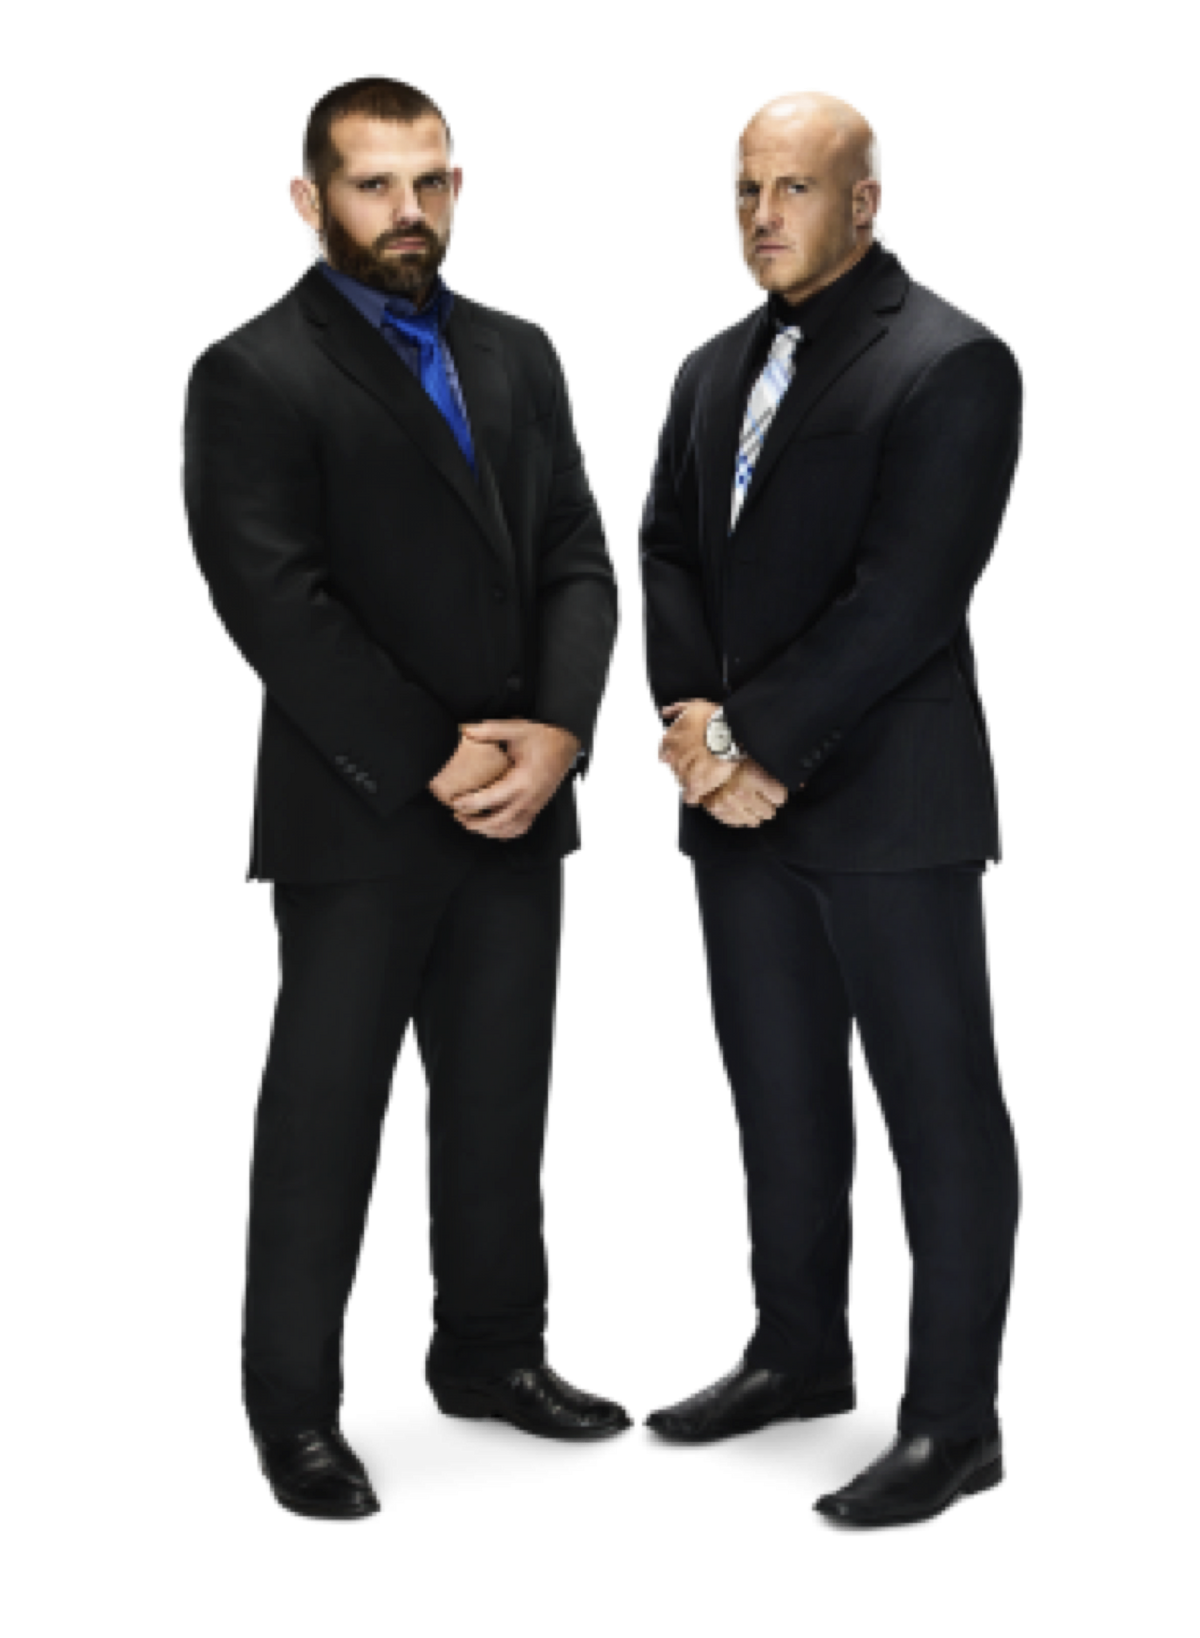 j and j security wwe 2022